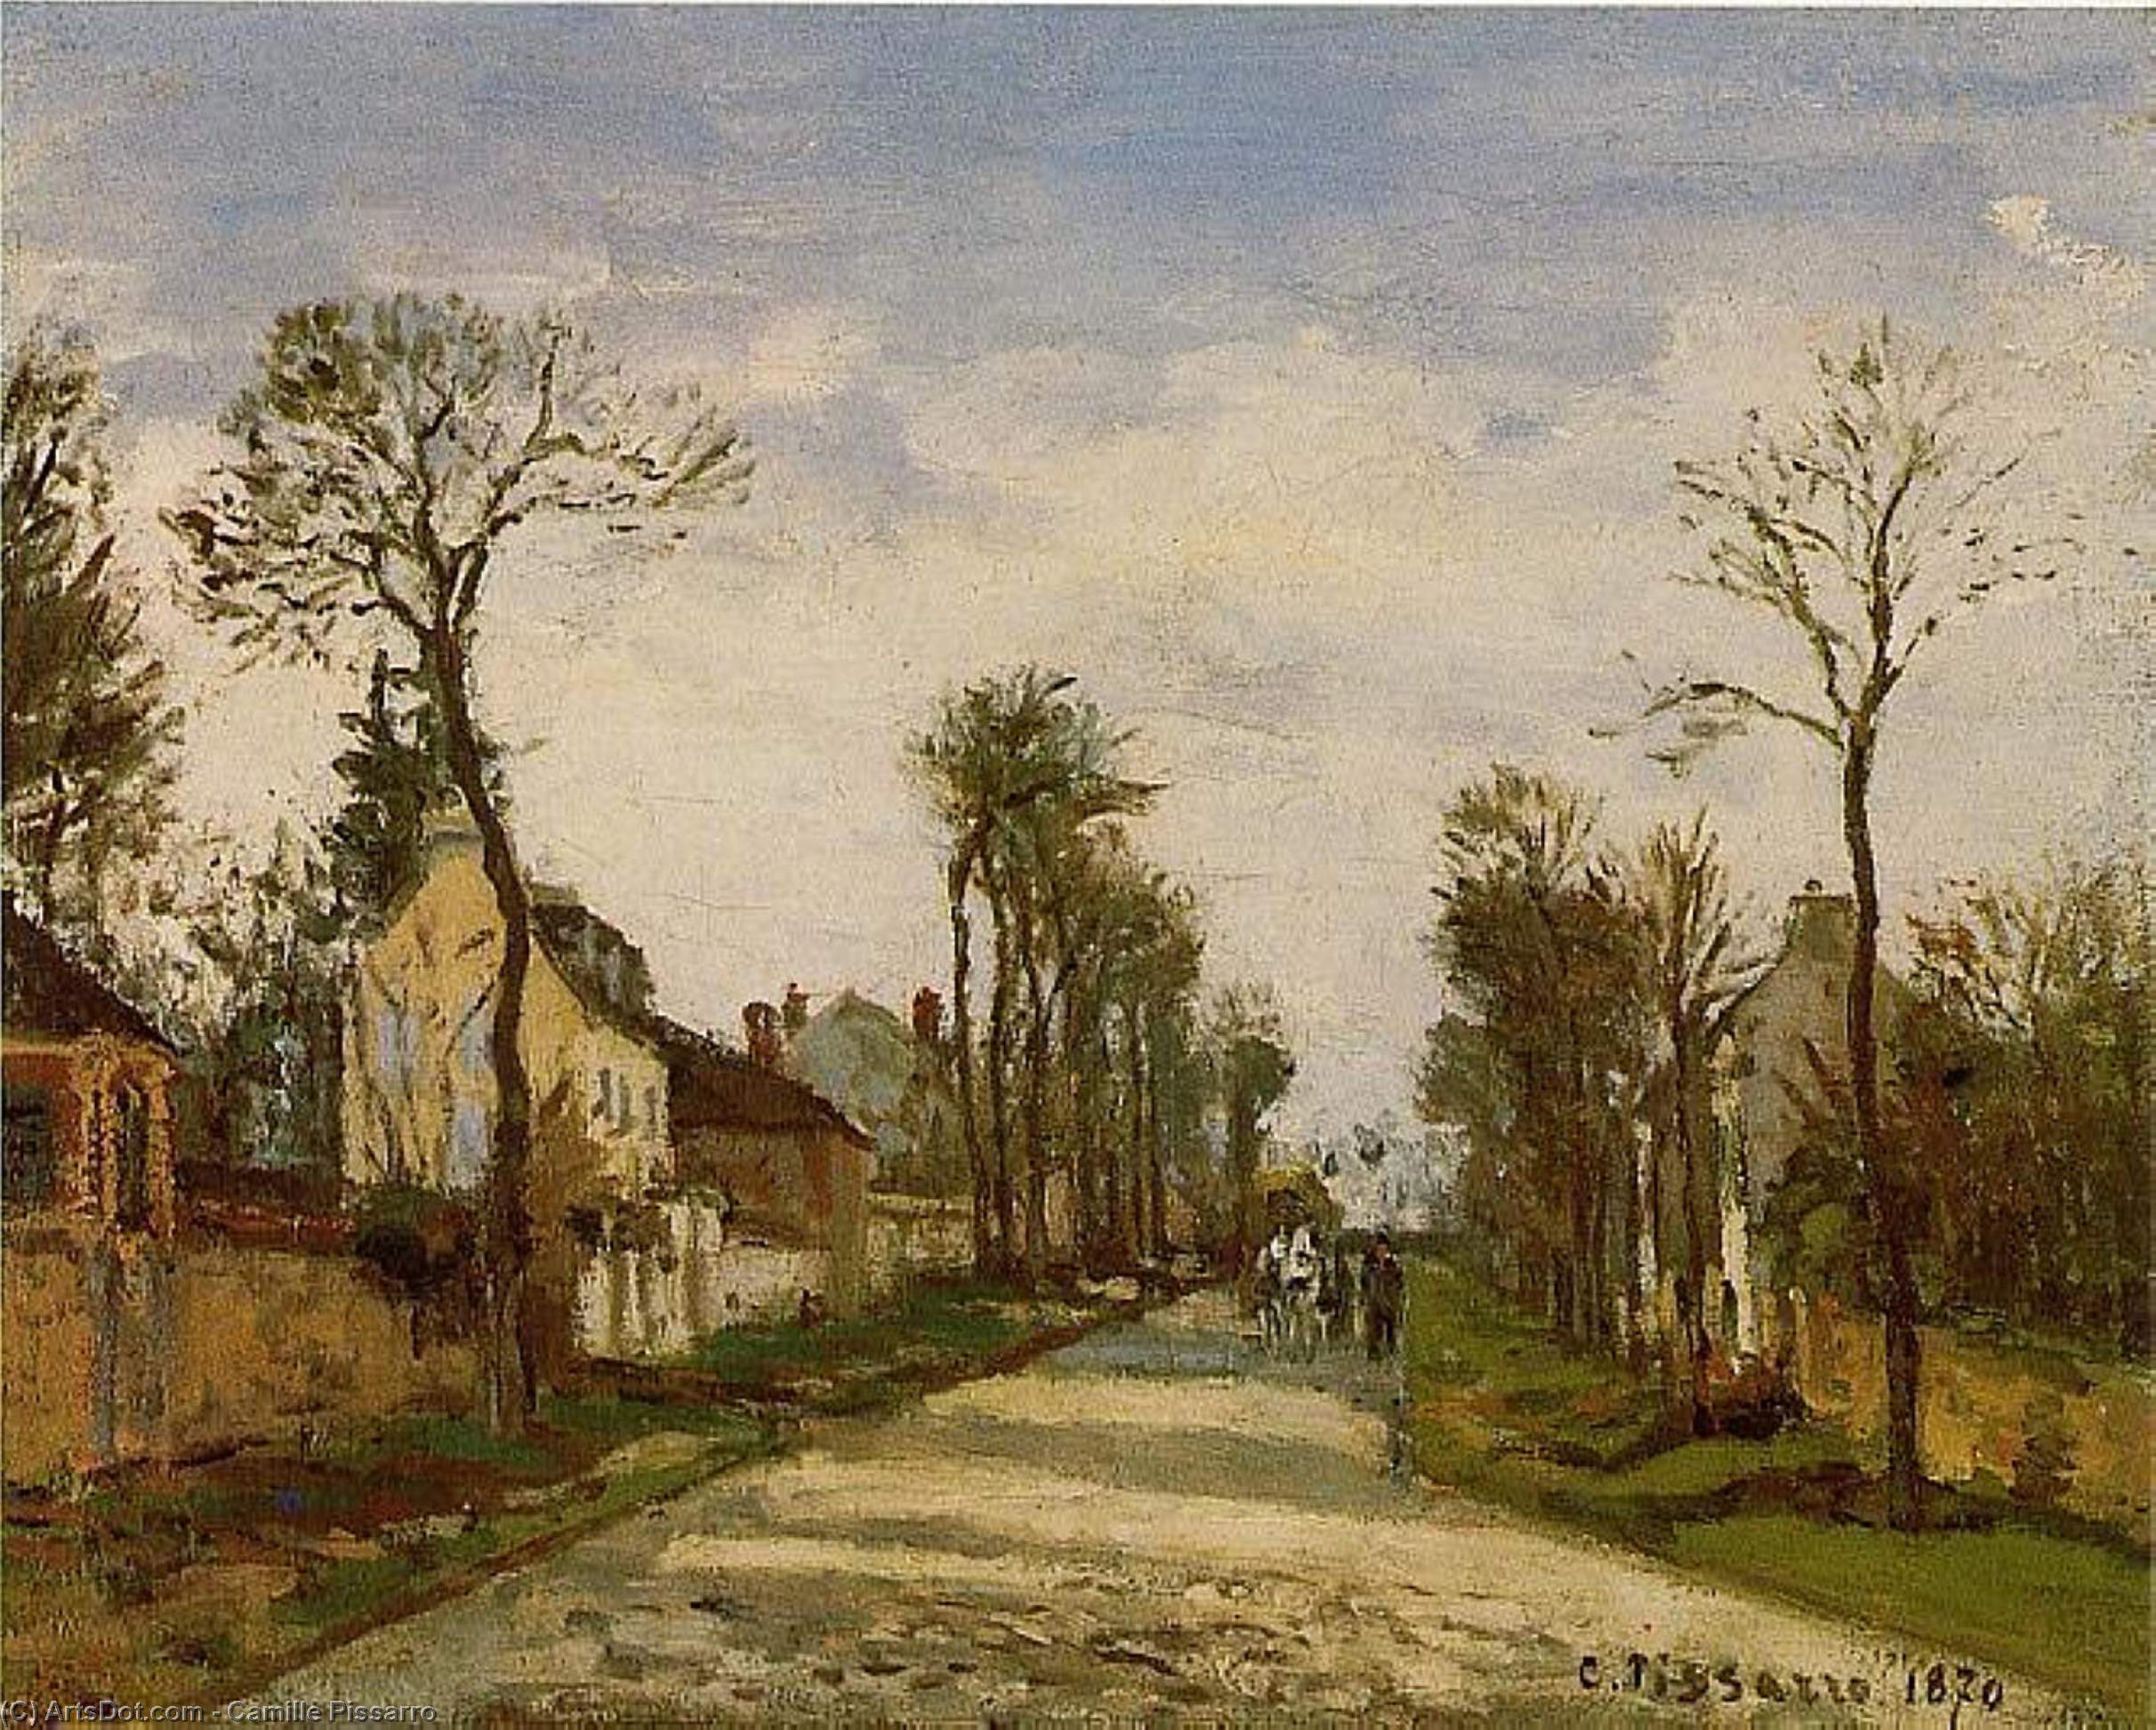 WikiOO.org - Encyclopedia of Fine Arts - Maleri, Artwork Camille Pissarro - The Road to Caint-Cyr at Louveciennes